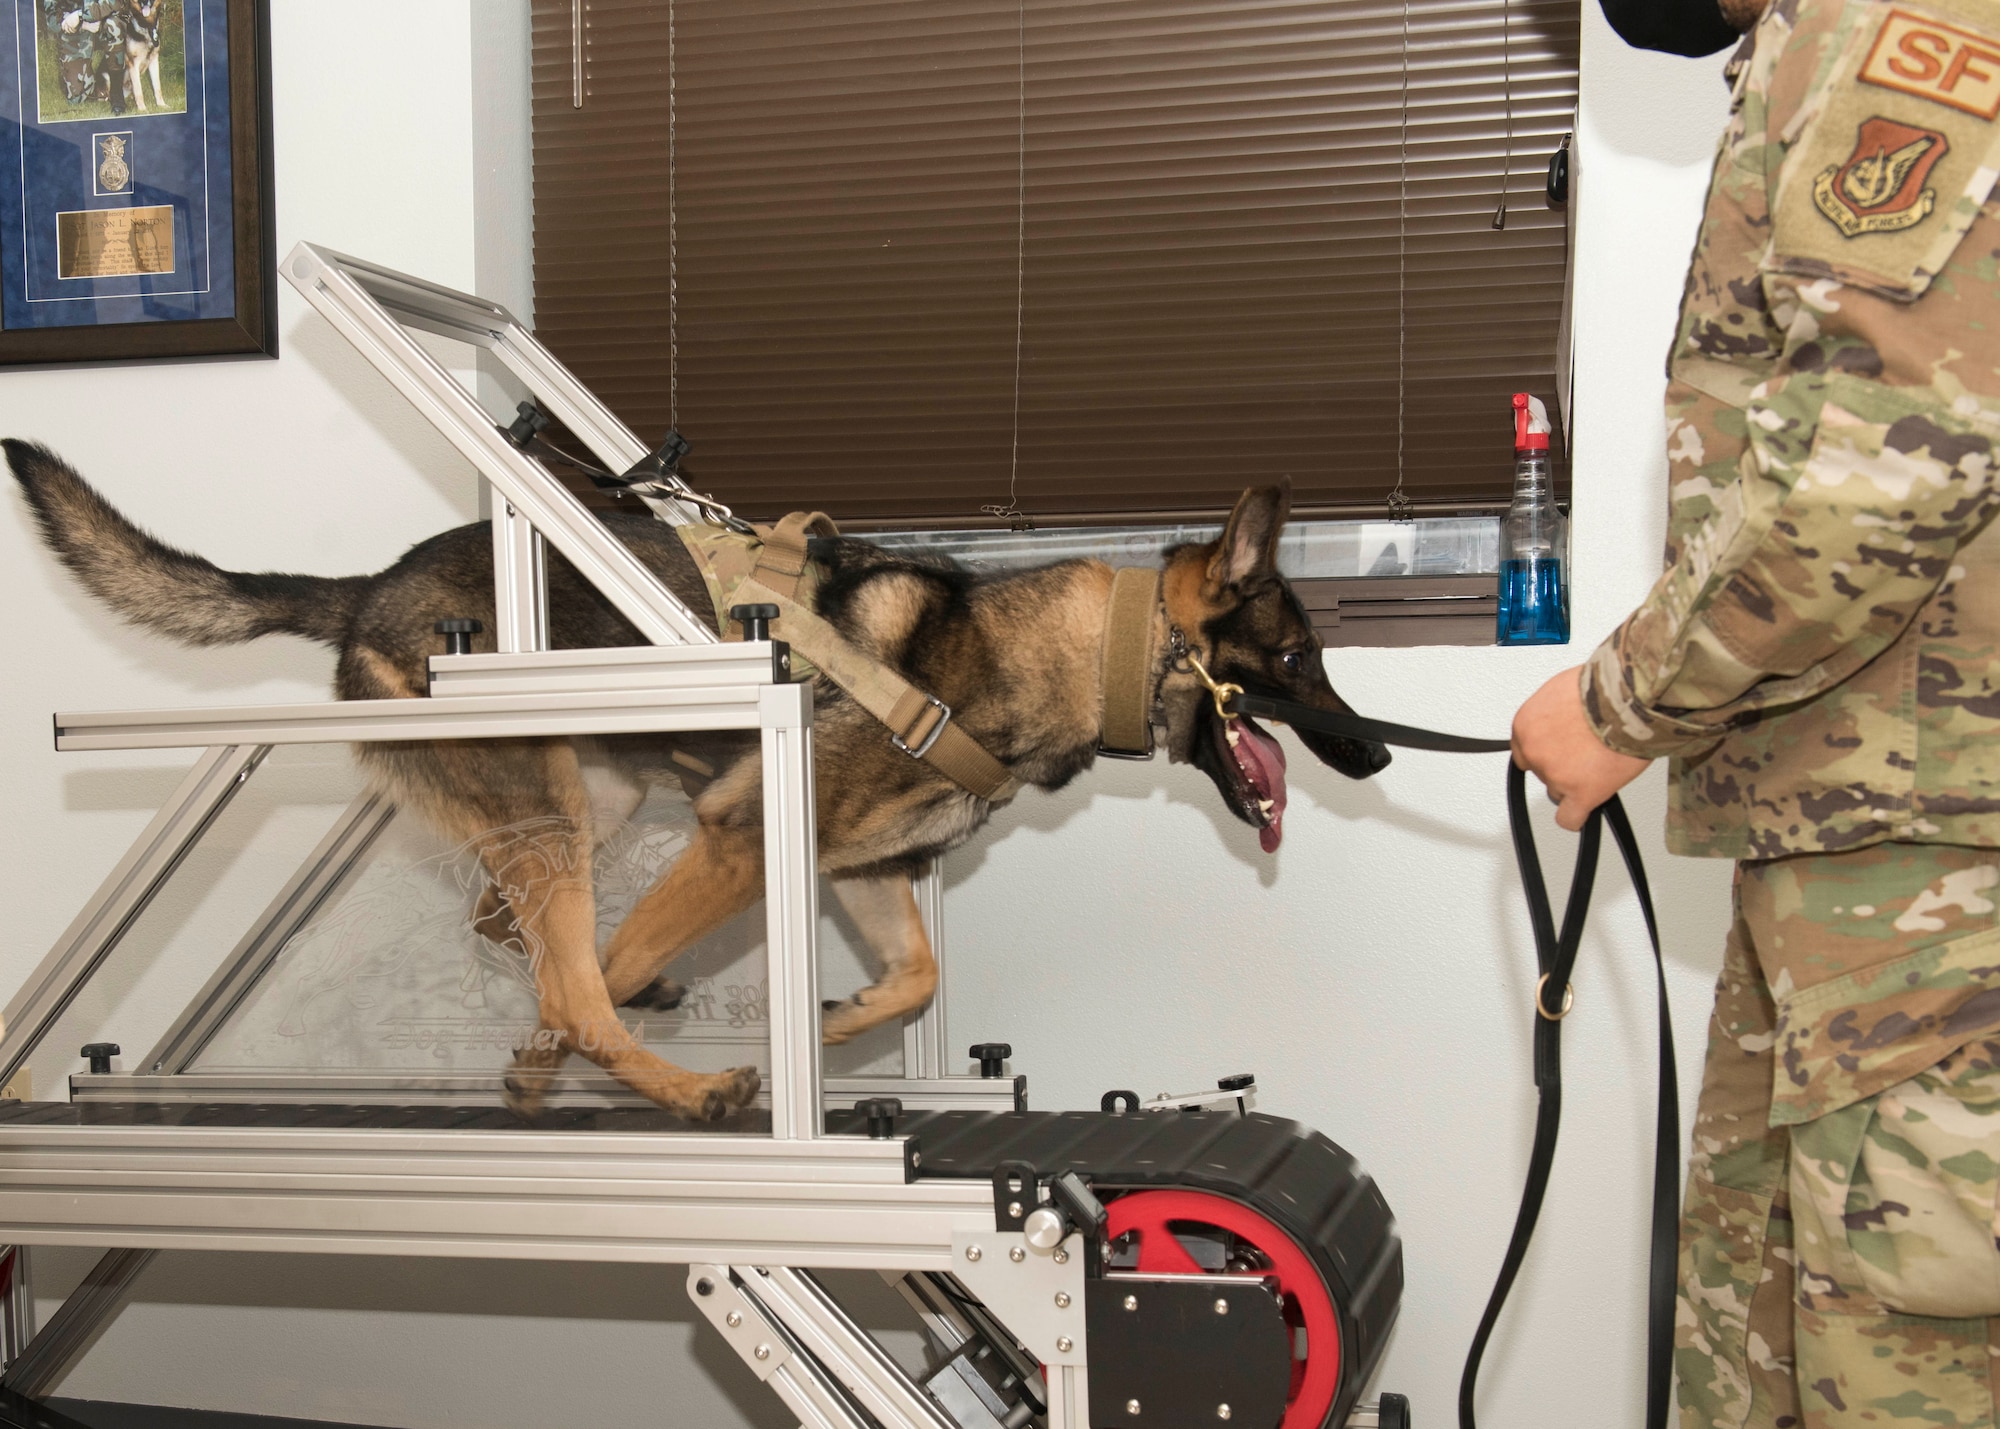 U.S. Air Force Staff Sgt. Dominic Williams, a 673d Security Forces Squadron military working dog (MWD) handler, has MWD Evelyn, a 673d SFS K-9, run on a dog treadmill for physical conditioning during an immersion with the 673d SFS at Joint Base Elmendorf-Richardson, Alaska, Feb. 2, 2021. The tour familiarized base leadership with the 673d SFS and its role in maintaining the safety of the JBER community and security of the installation and its resources.